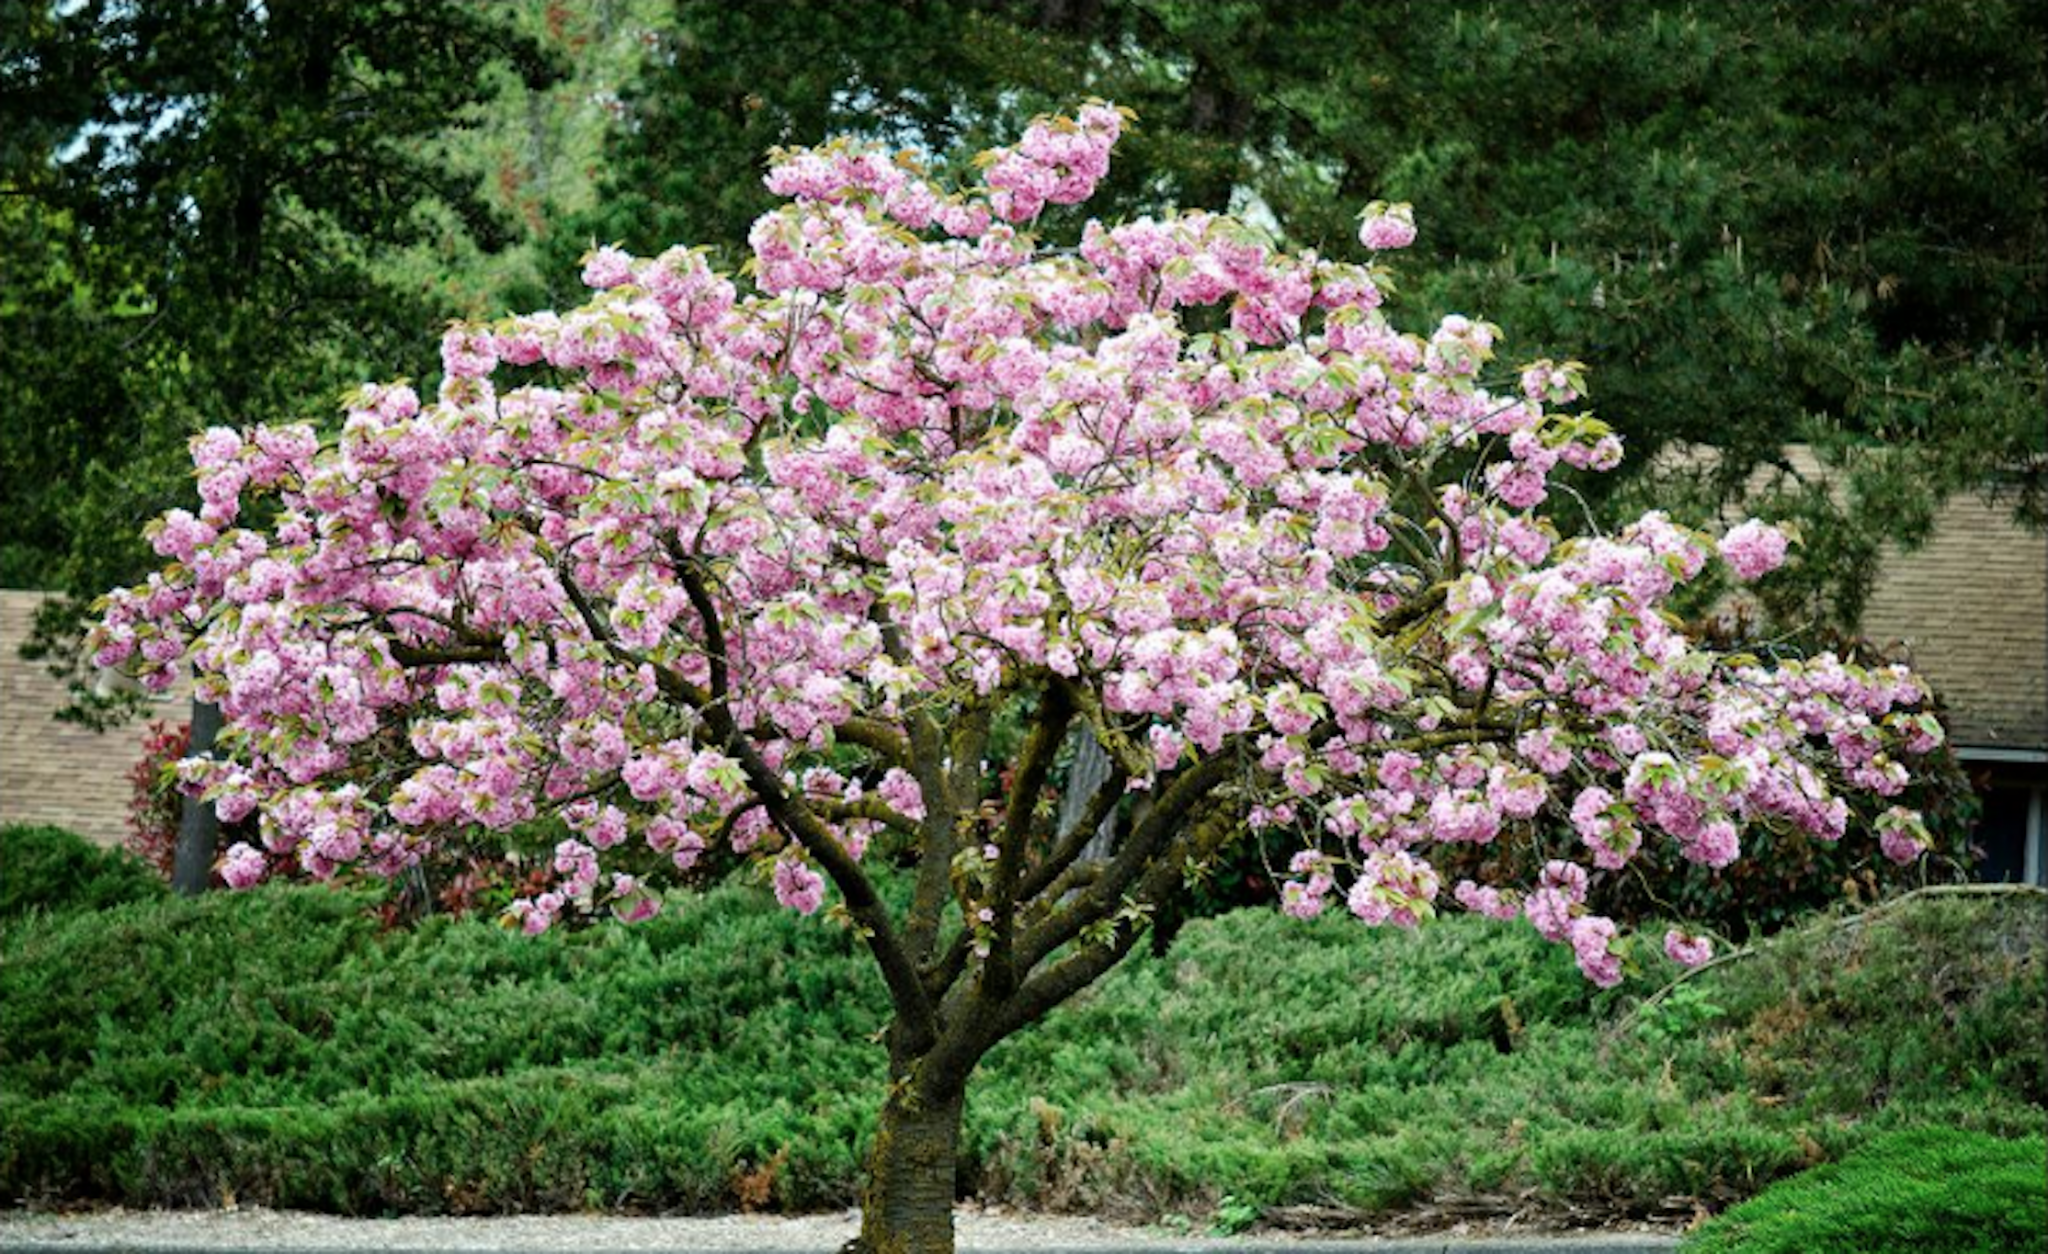 Can T Travel To Dc Plant A Cherry Blossom Tree In Your Own Backyard